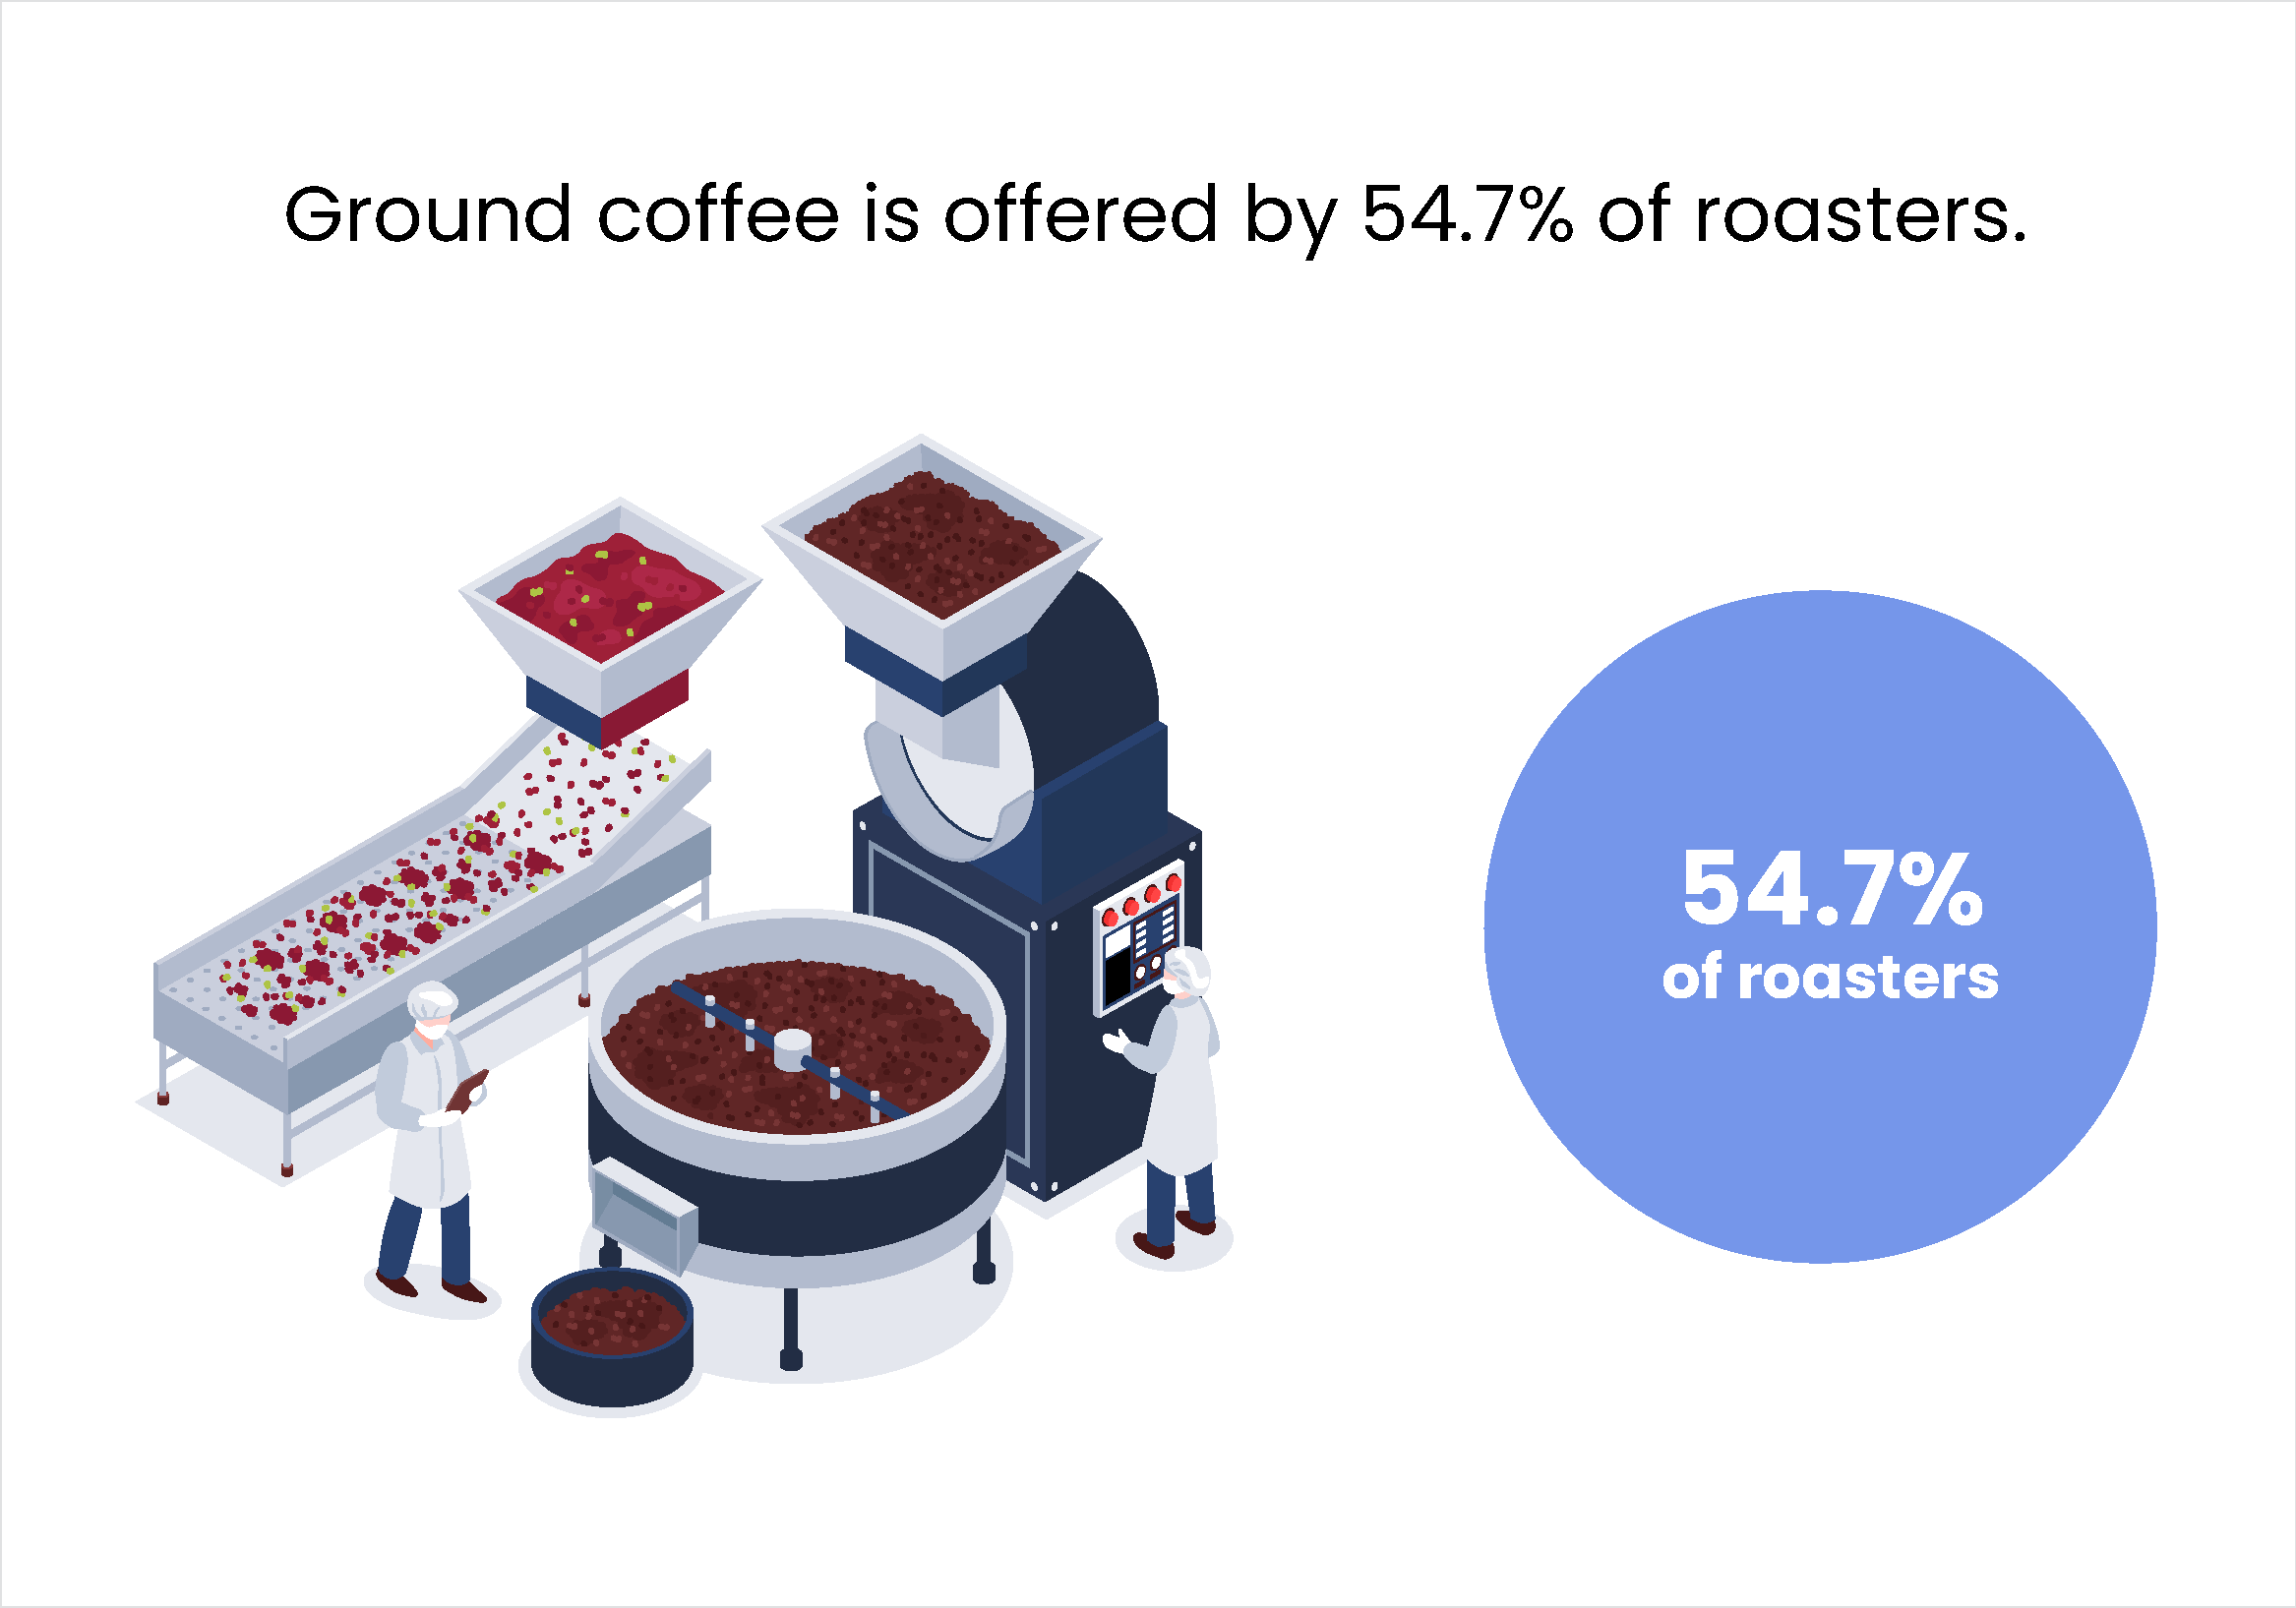 Ground coffee is offered by 54.7% of roasters